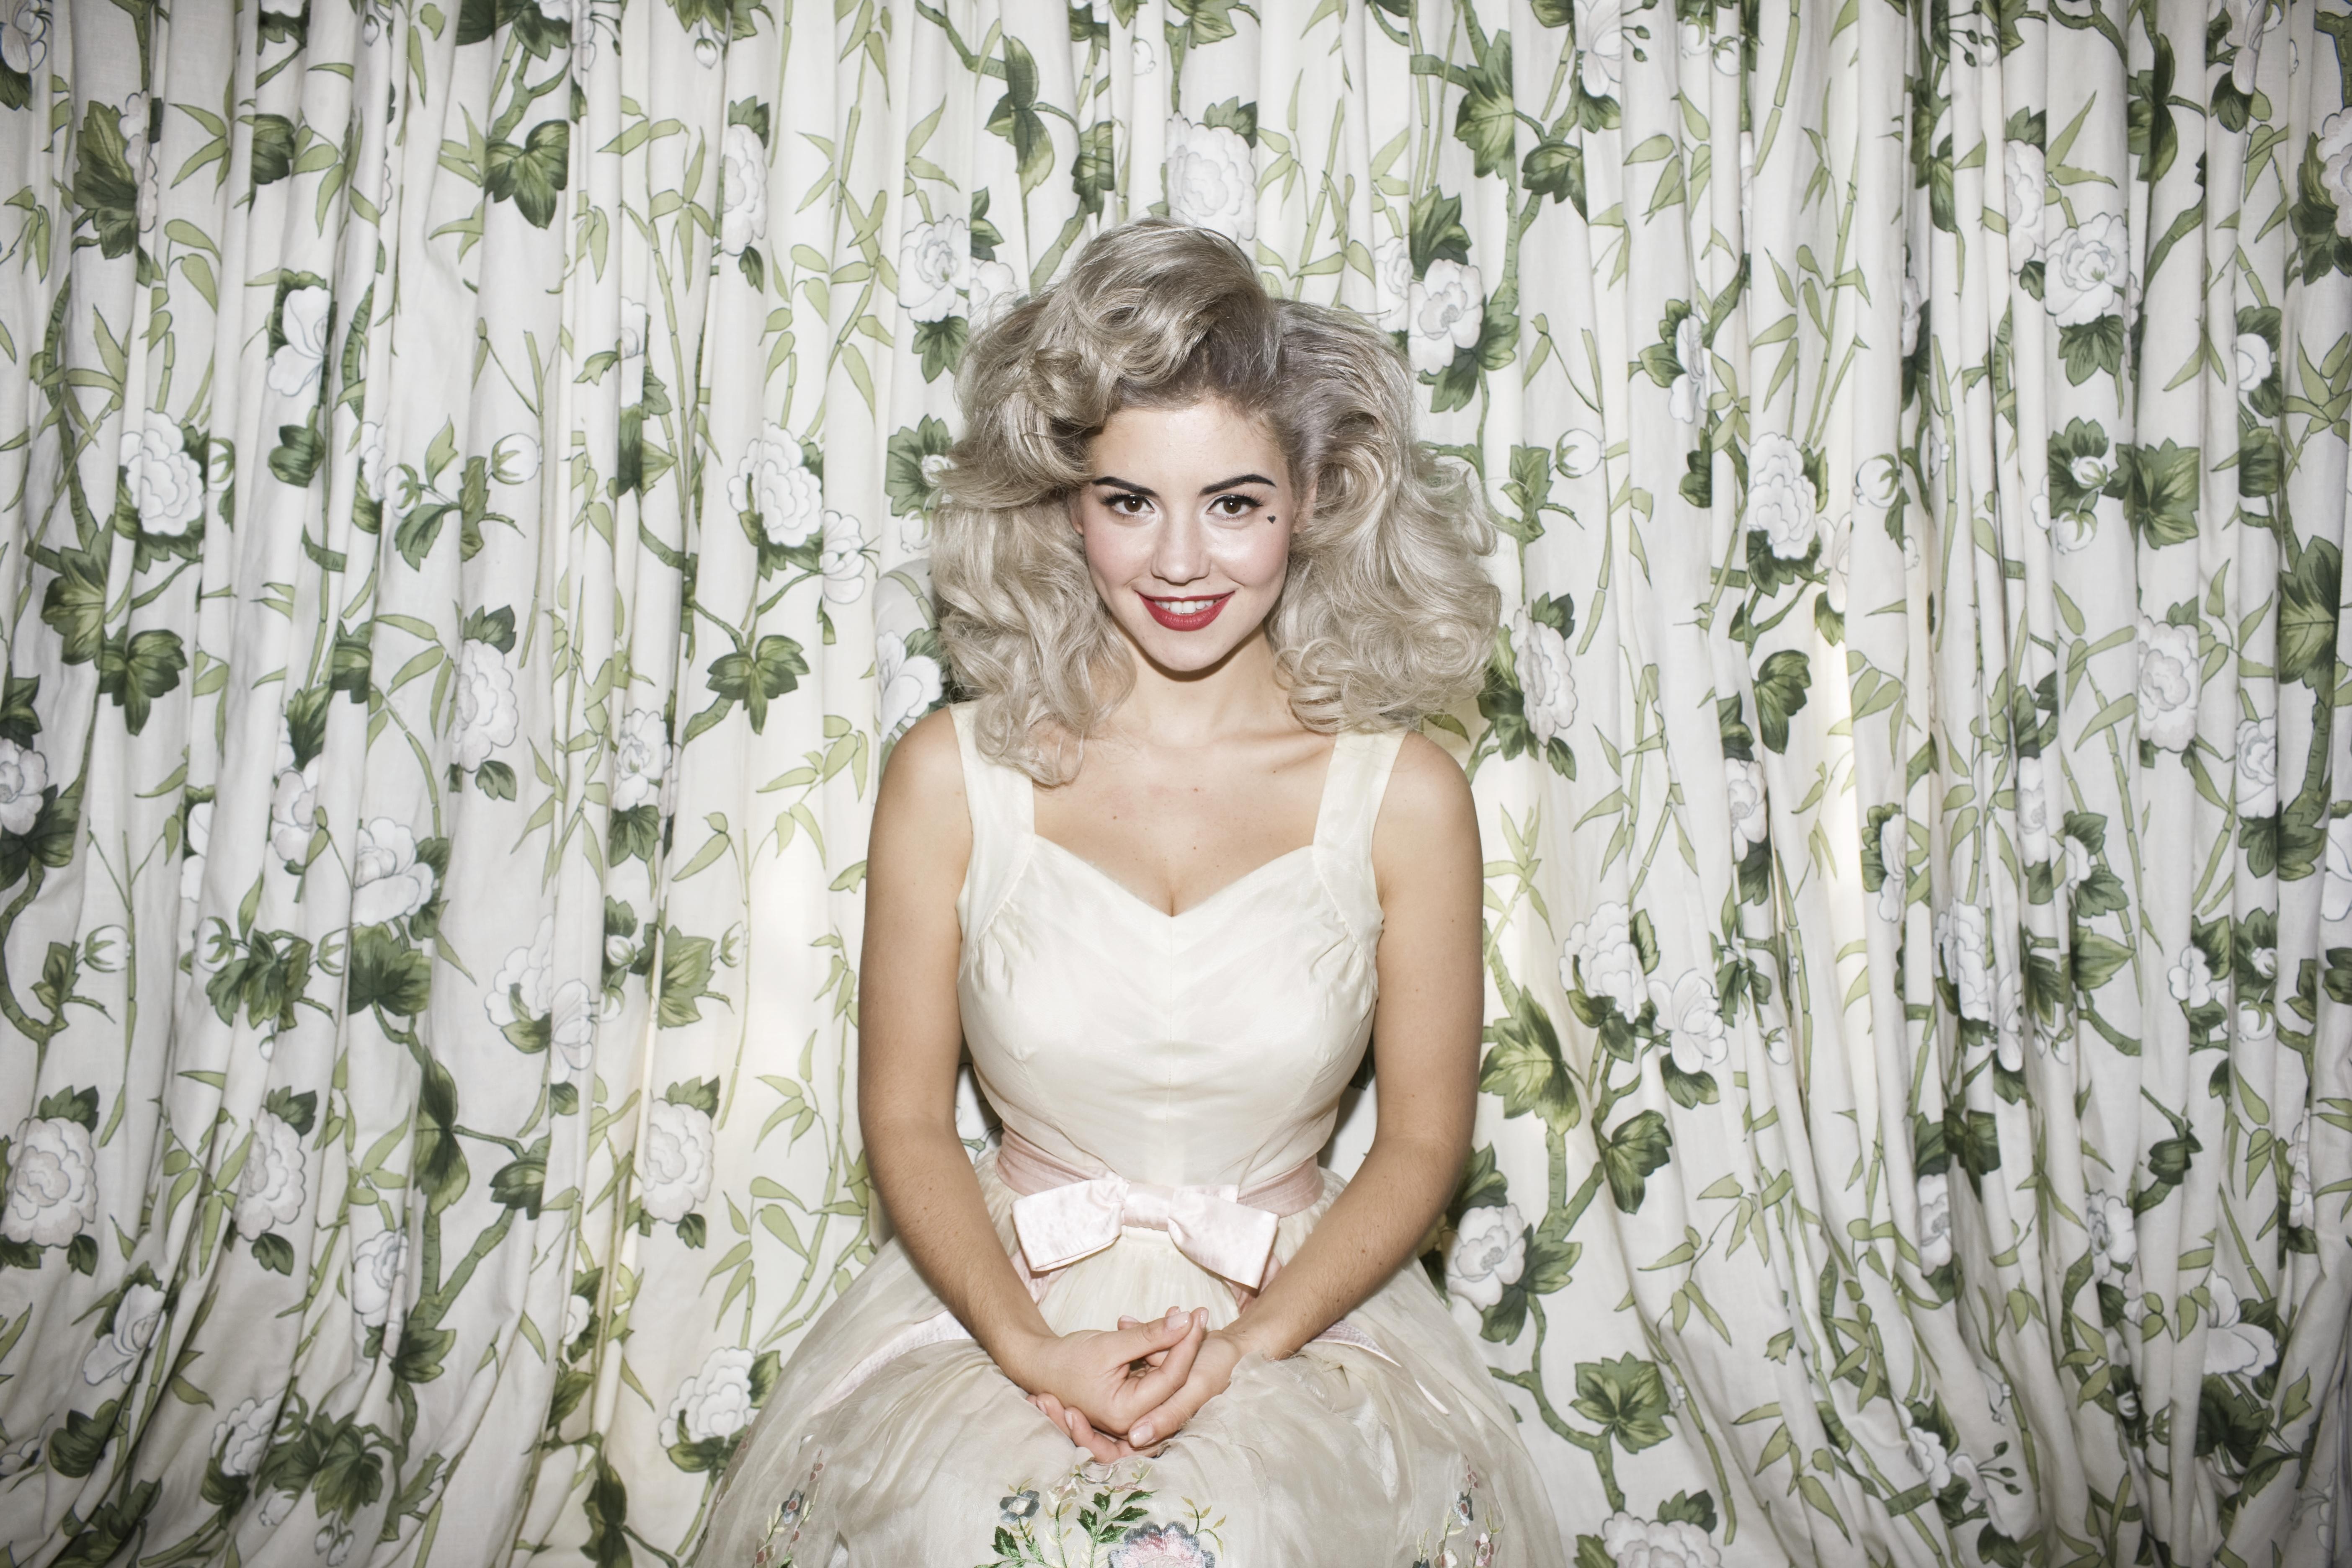 Women Blonde Looking At Viewer White Dress Marina And The Diamonds 5616x3744